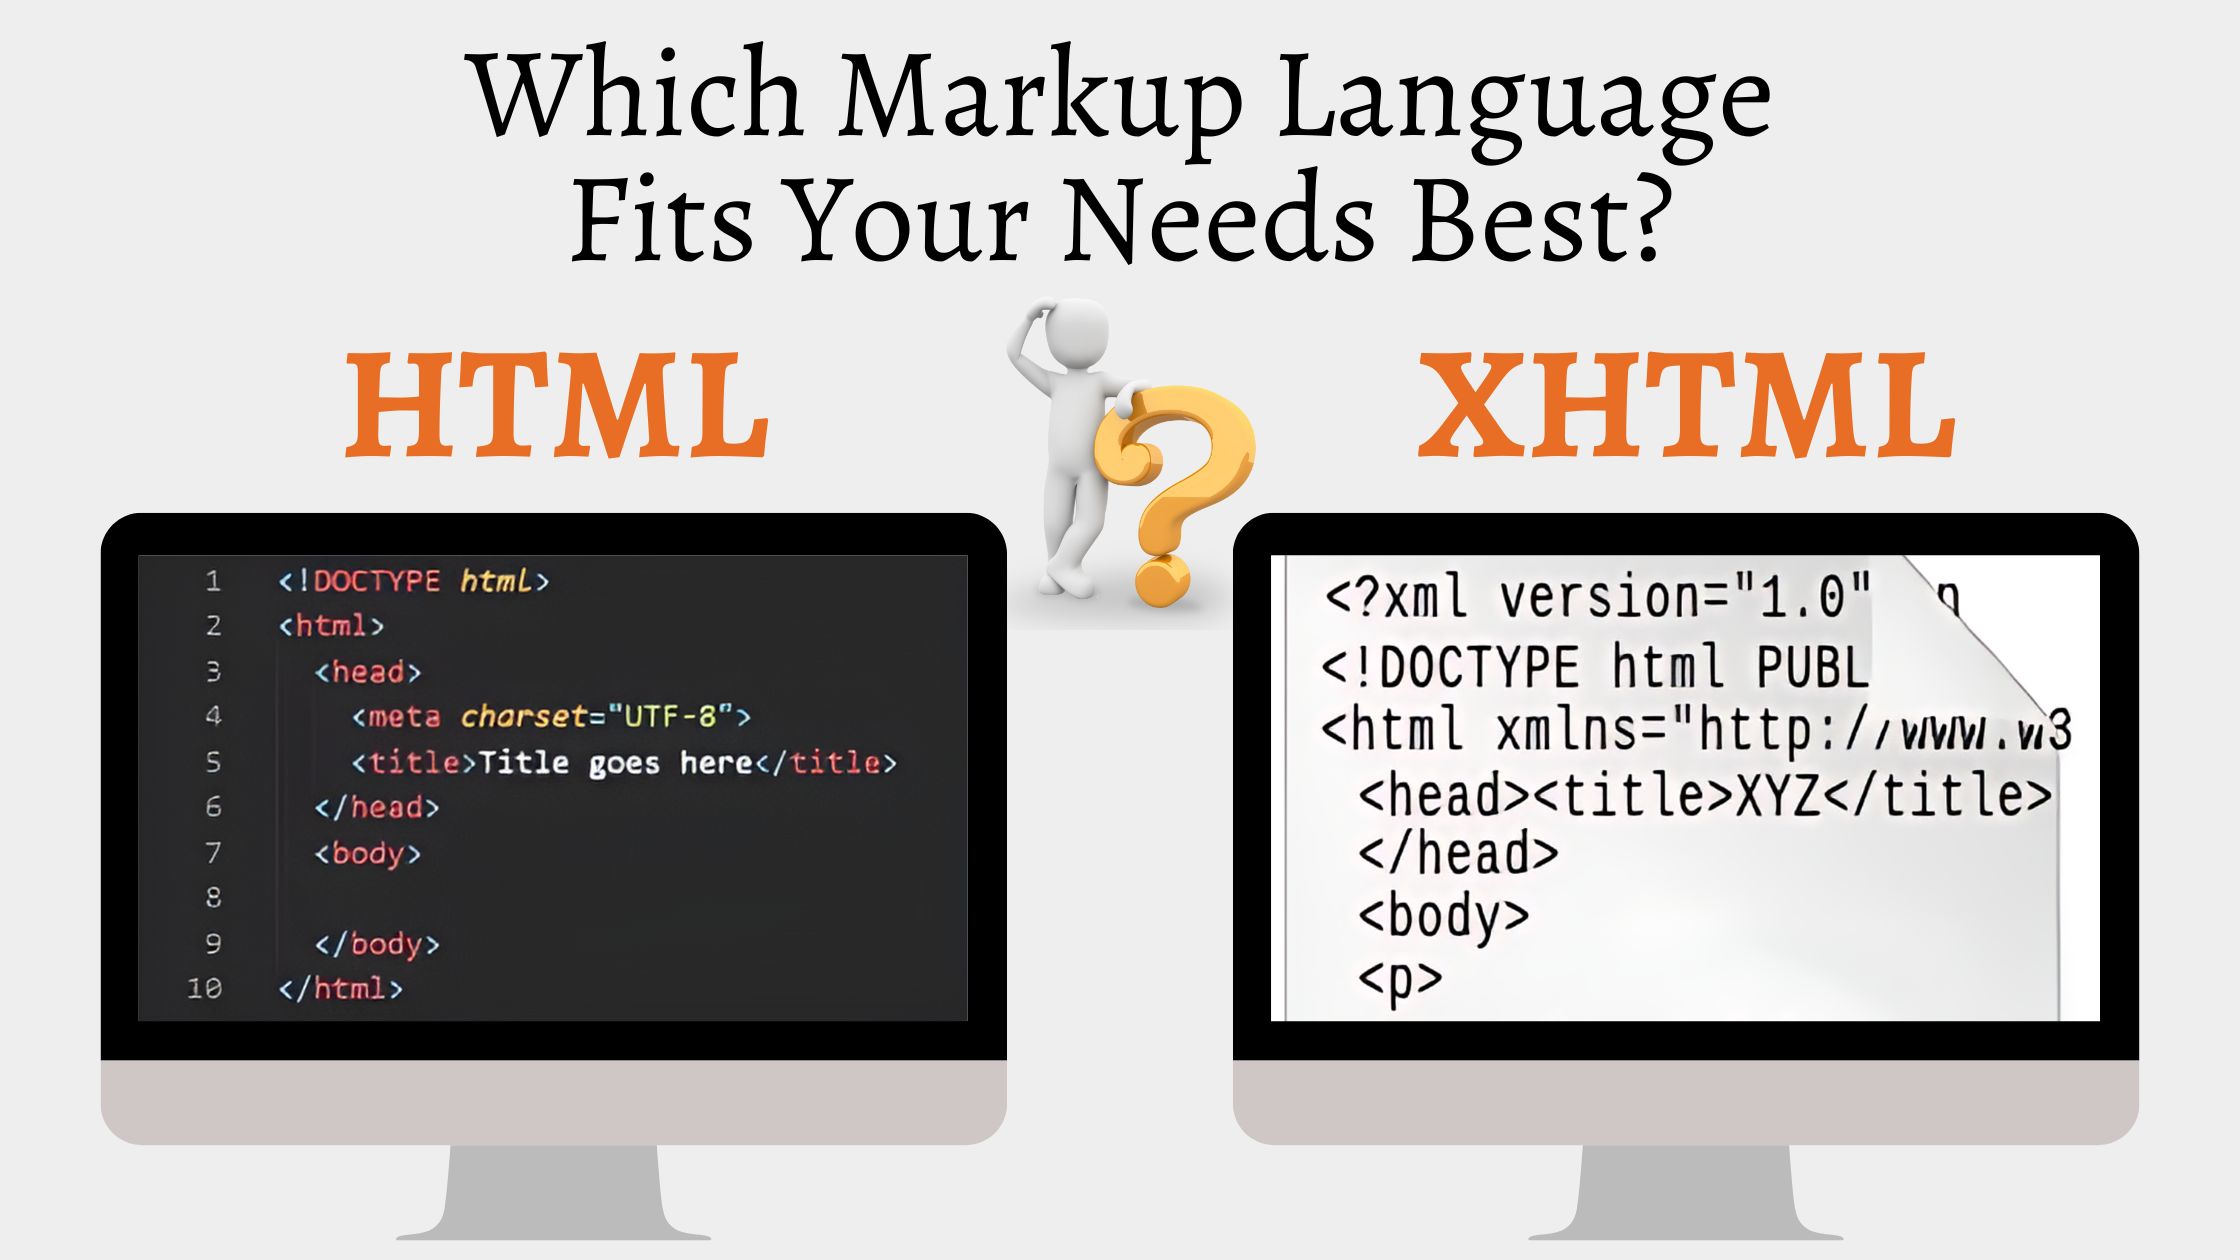 HTML or XHTML: Which Markup Language Fits Your Needs Best?